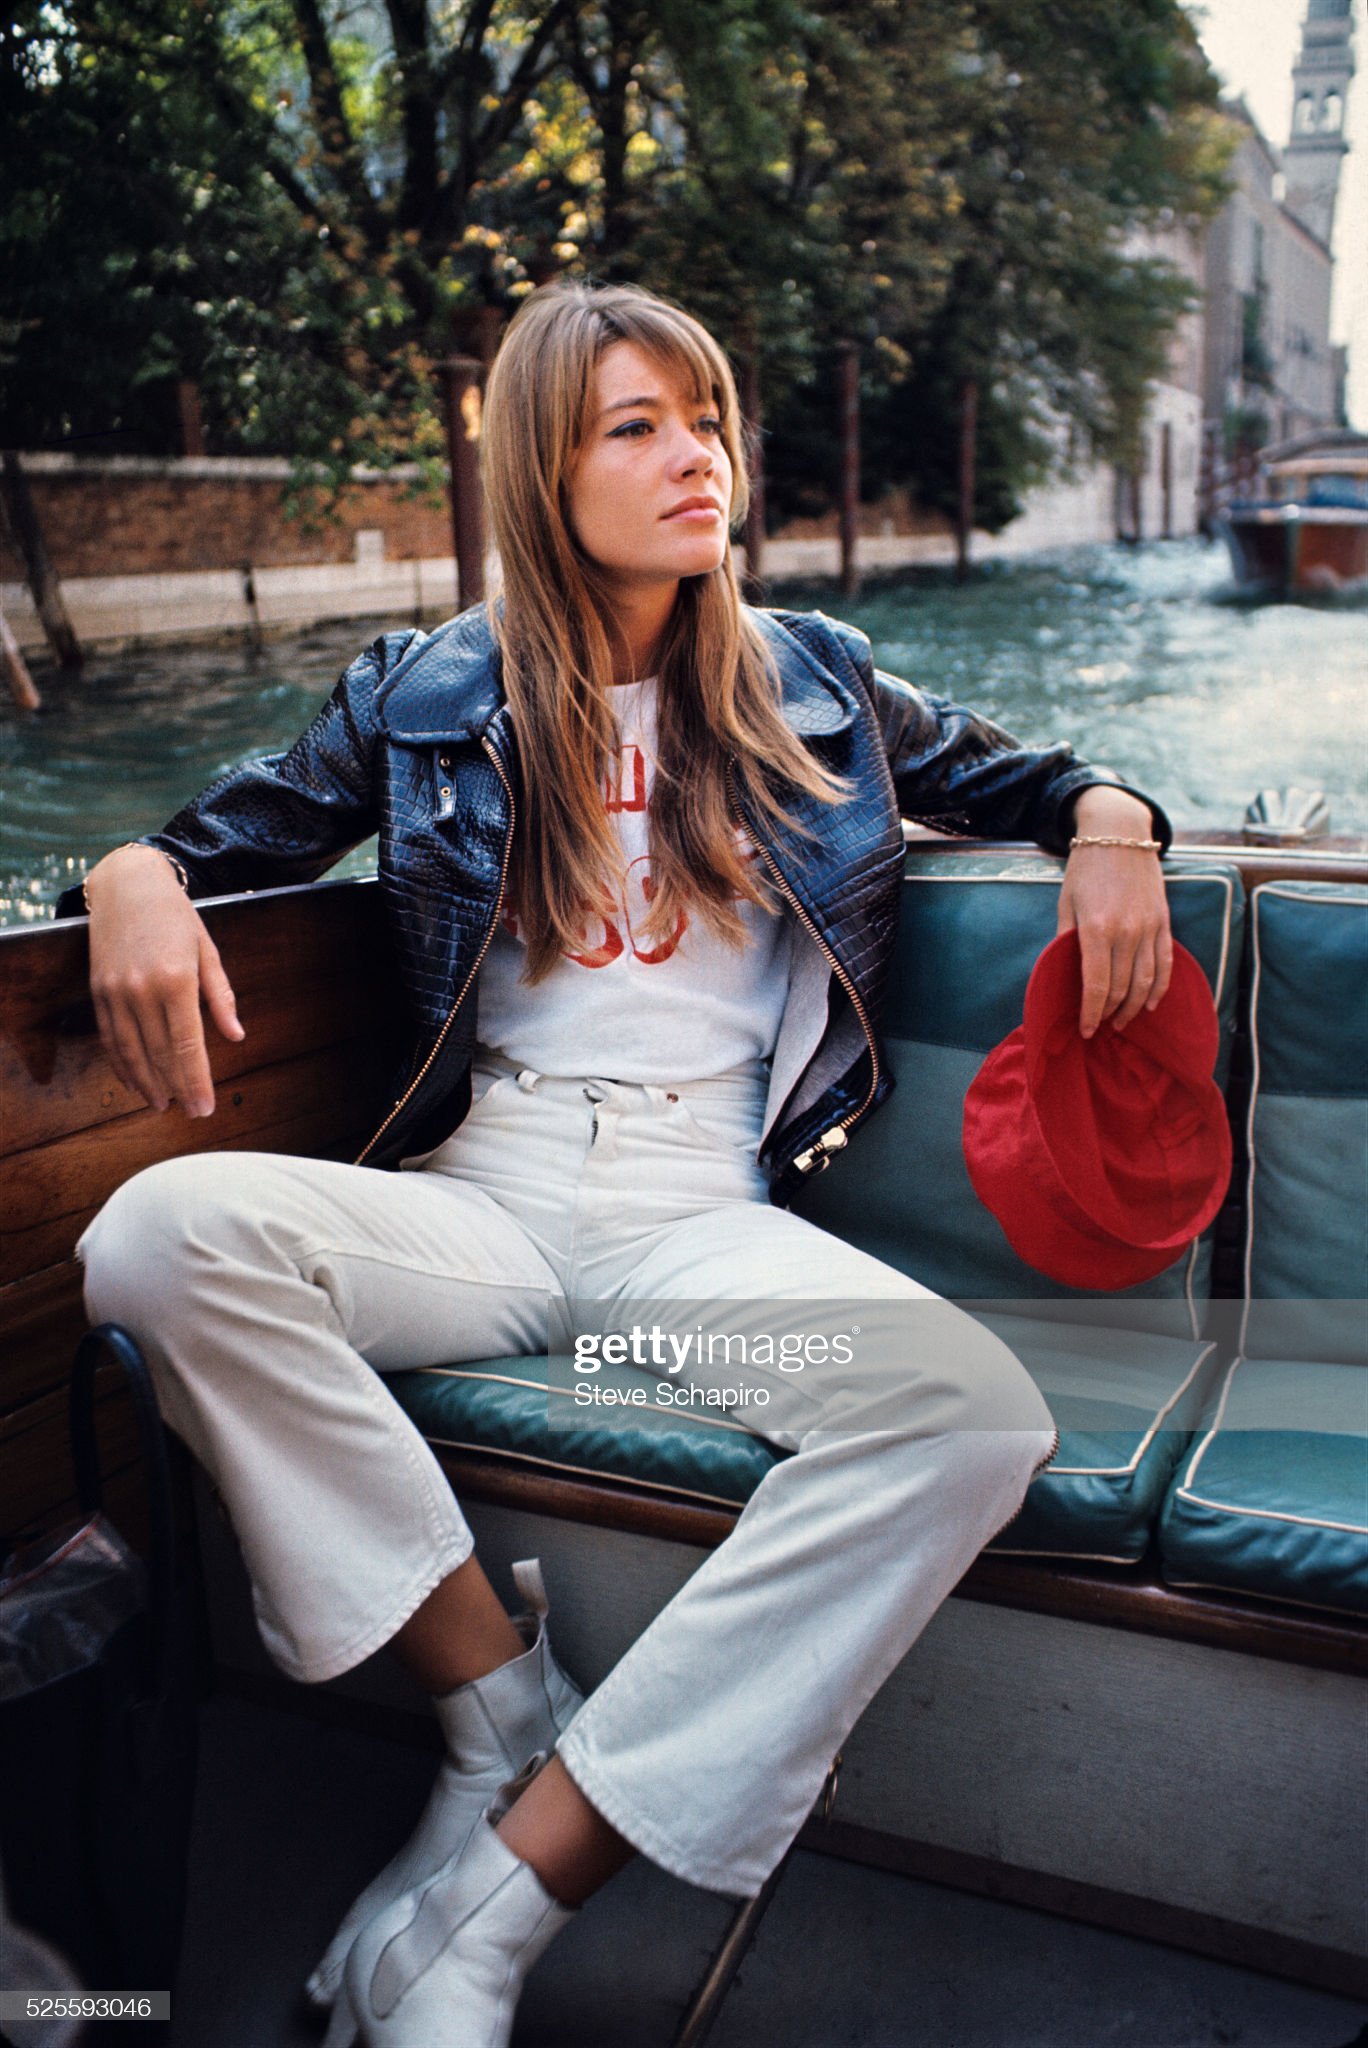 View of French pop musician and actress Françoise Hardy as she sits in a boat on a canal, Venice, Italy, September 1966. 